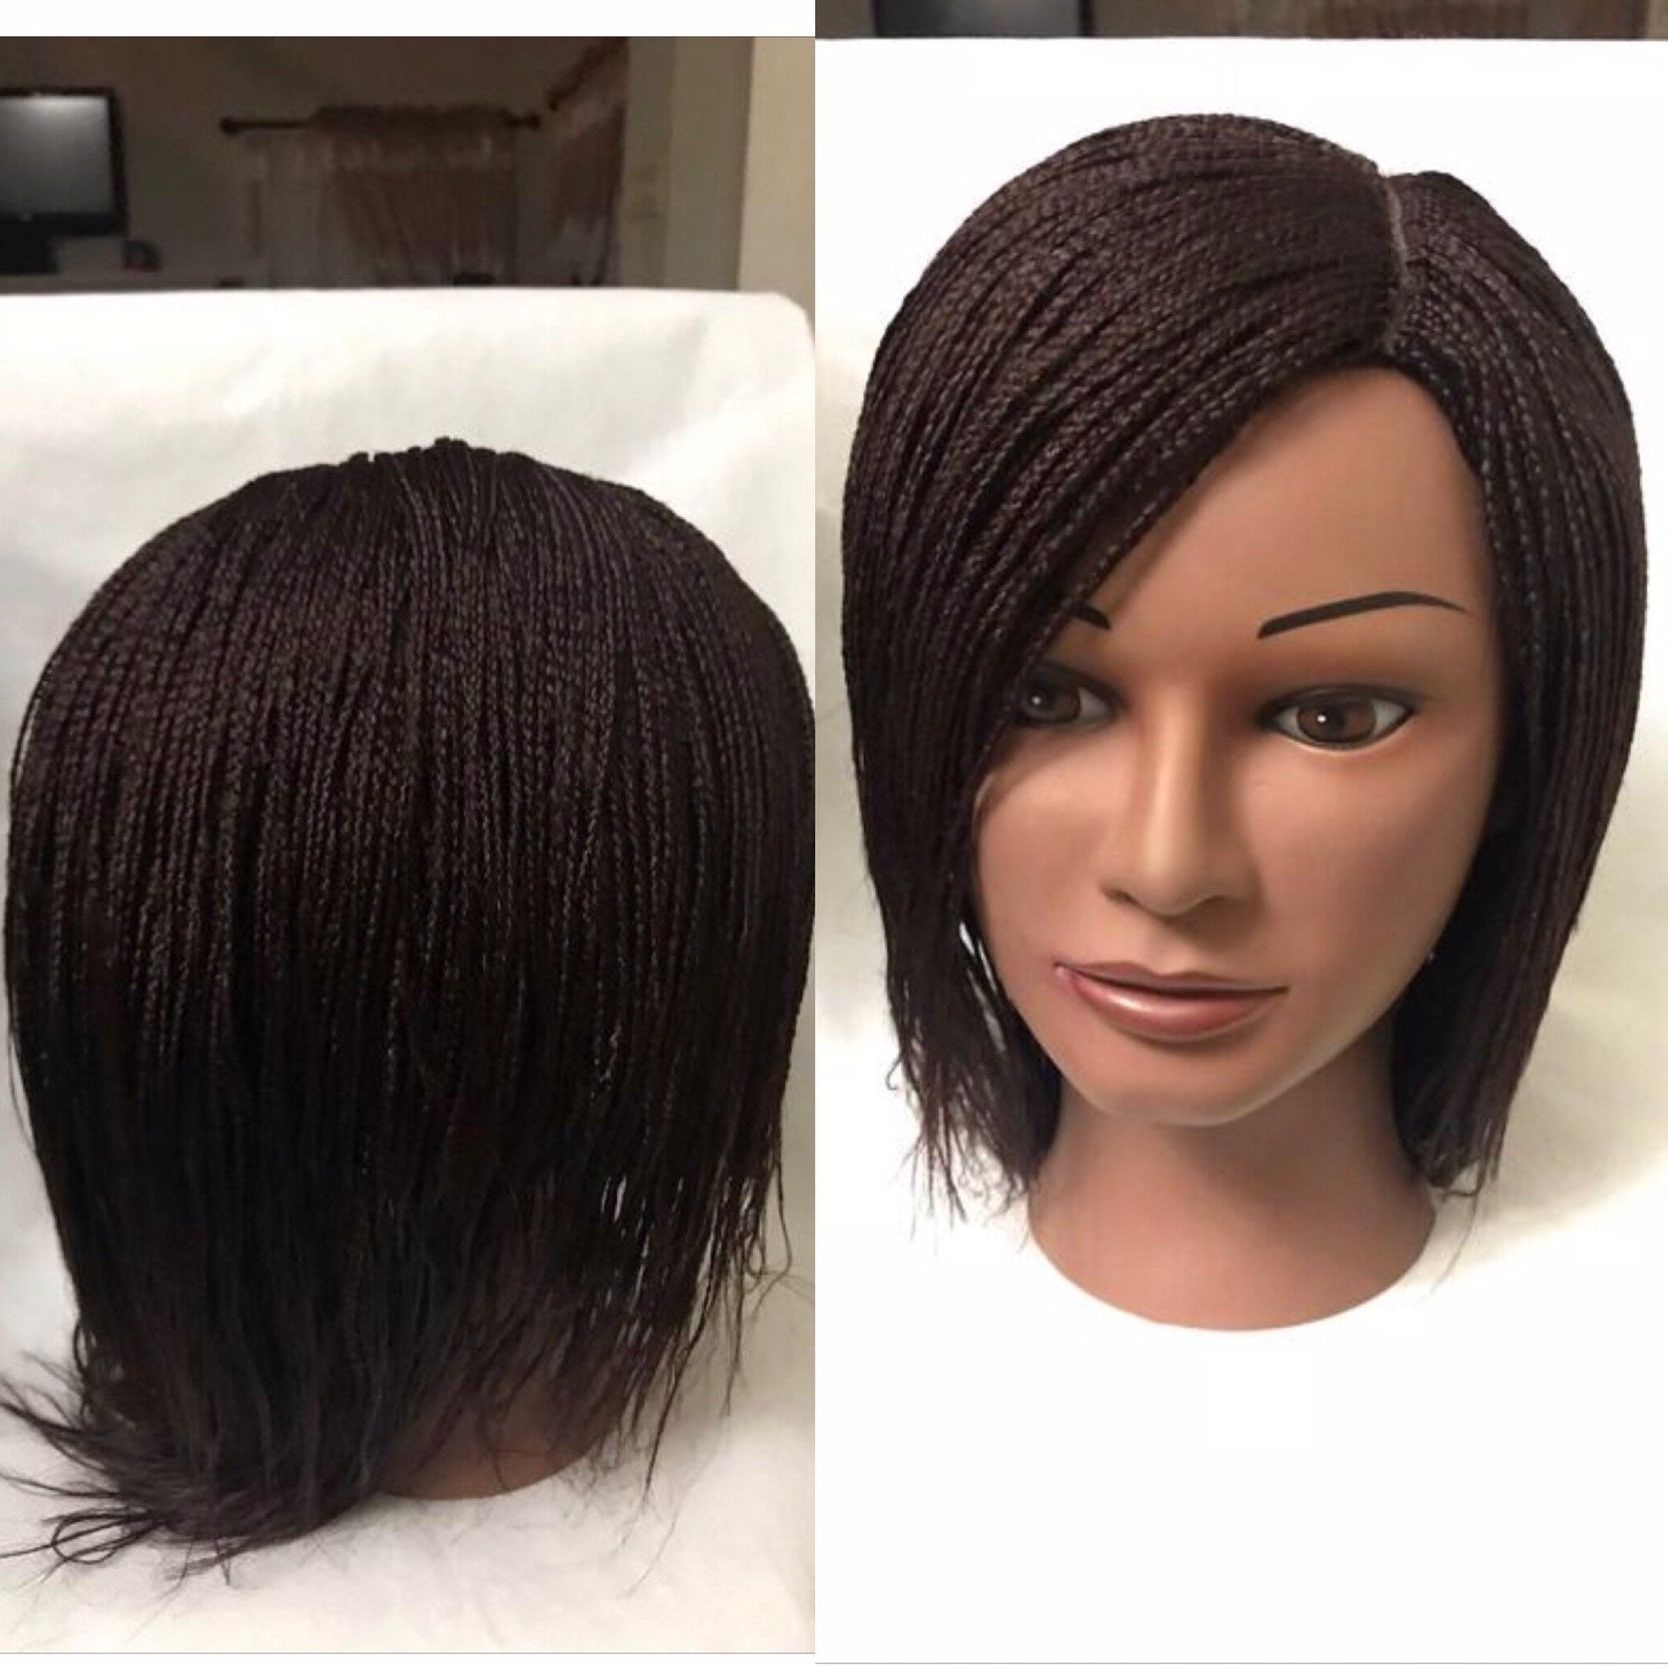 Widely Used Light Brown Braid Hairstyles Pertaining To Braided Wig/ Box Wig 10inches Wig.color On Display Is Color 30( Dark  Brown)this Is A Short,light Weight,natural Looking Braided Wig (View 19 of 20)